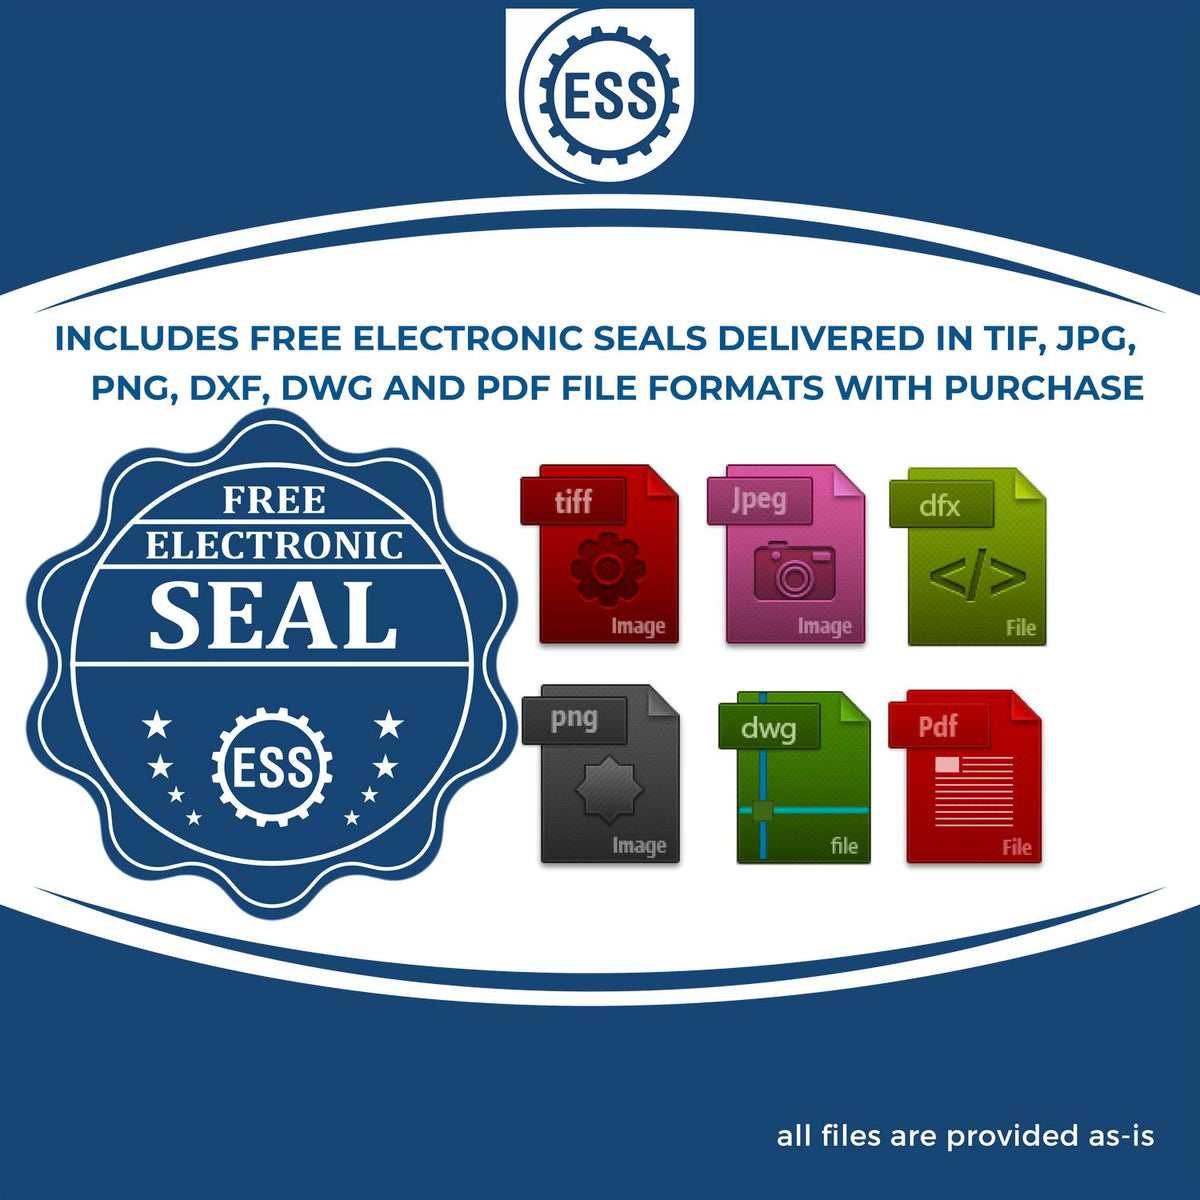 An infographic for the free electronic seal for the Soft Louisiana Professional Engineer Seal illustrating the different file type icons such as DXF, DWG, TIF, JPG and PNG.